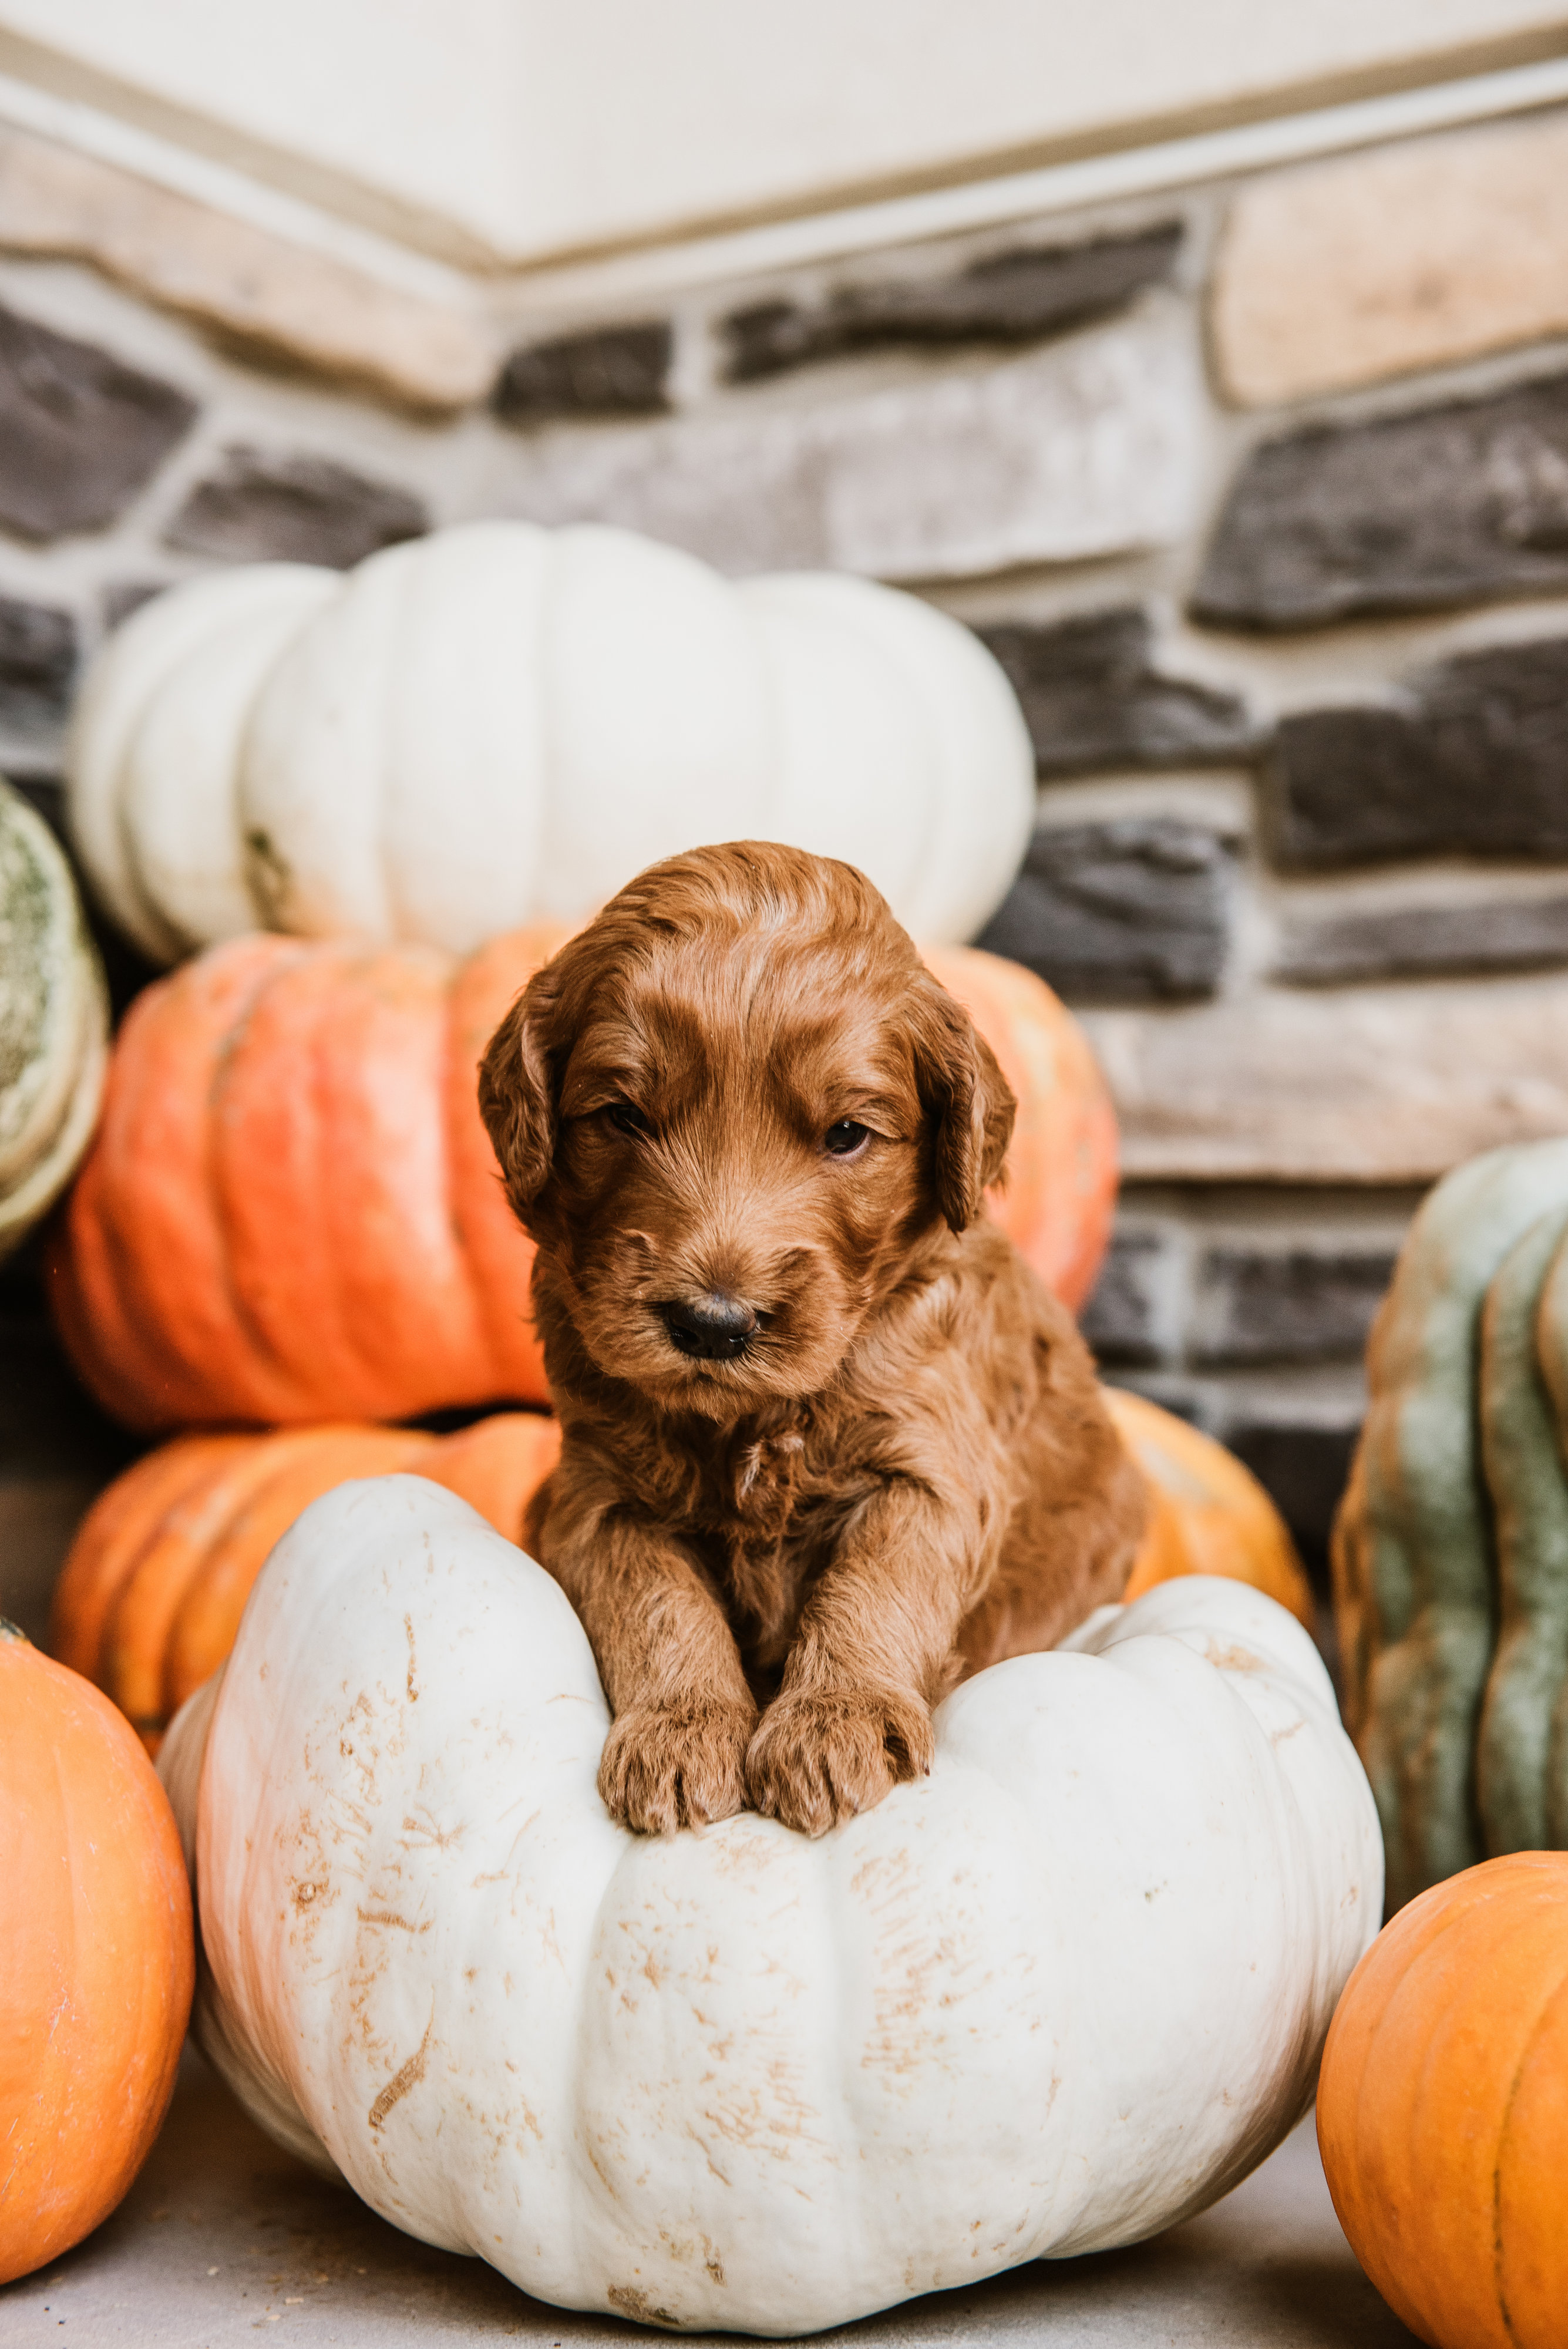 A goldendoodle puppy on a white pumpkin